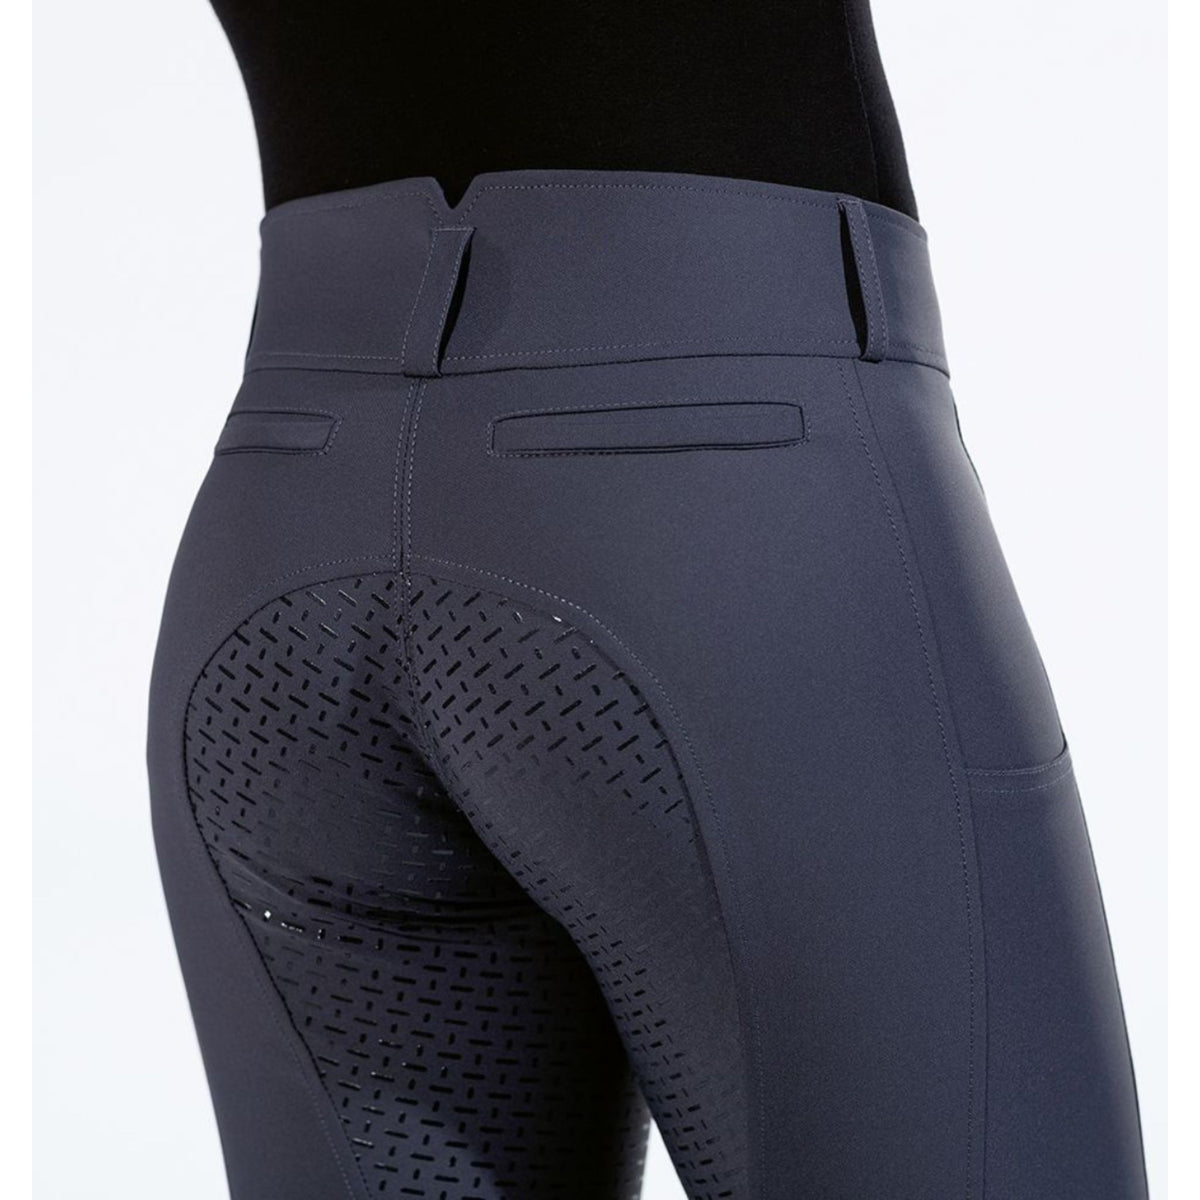 Close up of back of navy breeches with grip seat and pockets.